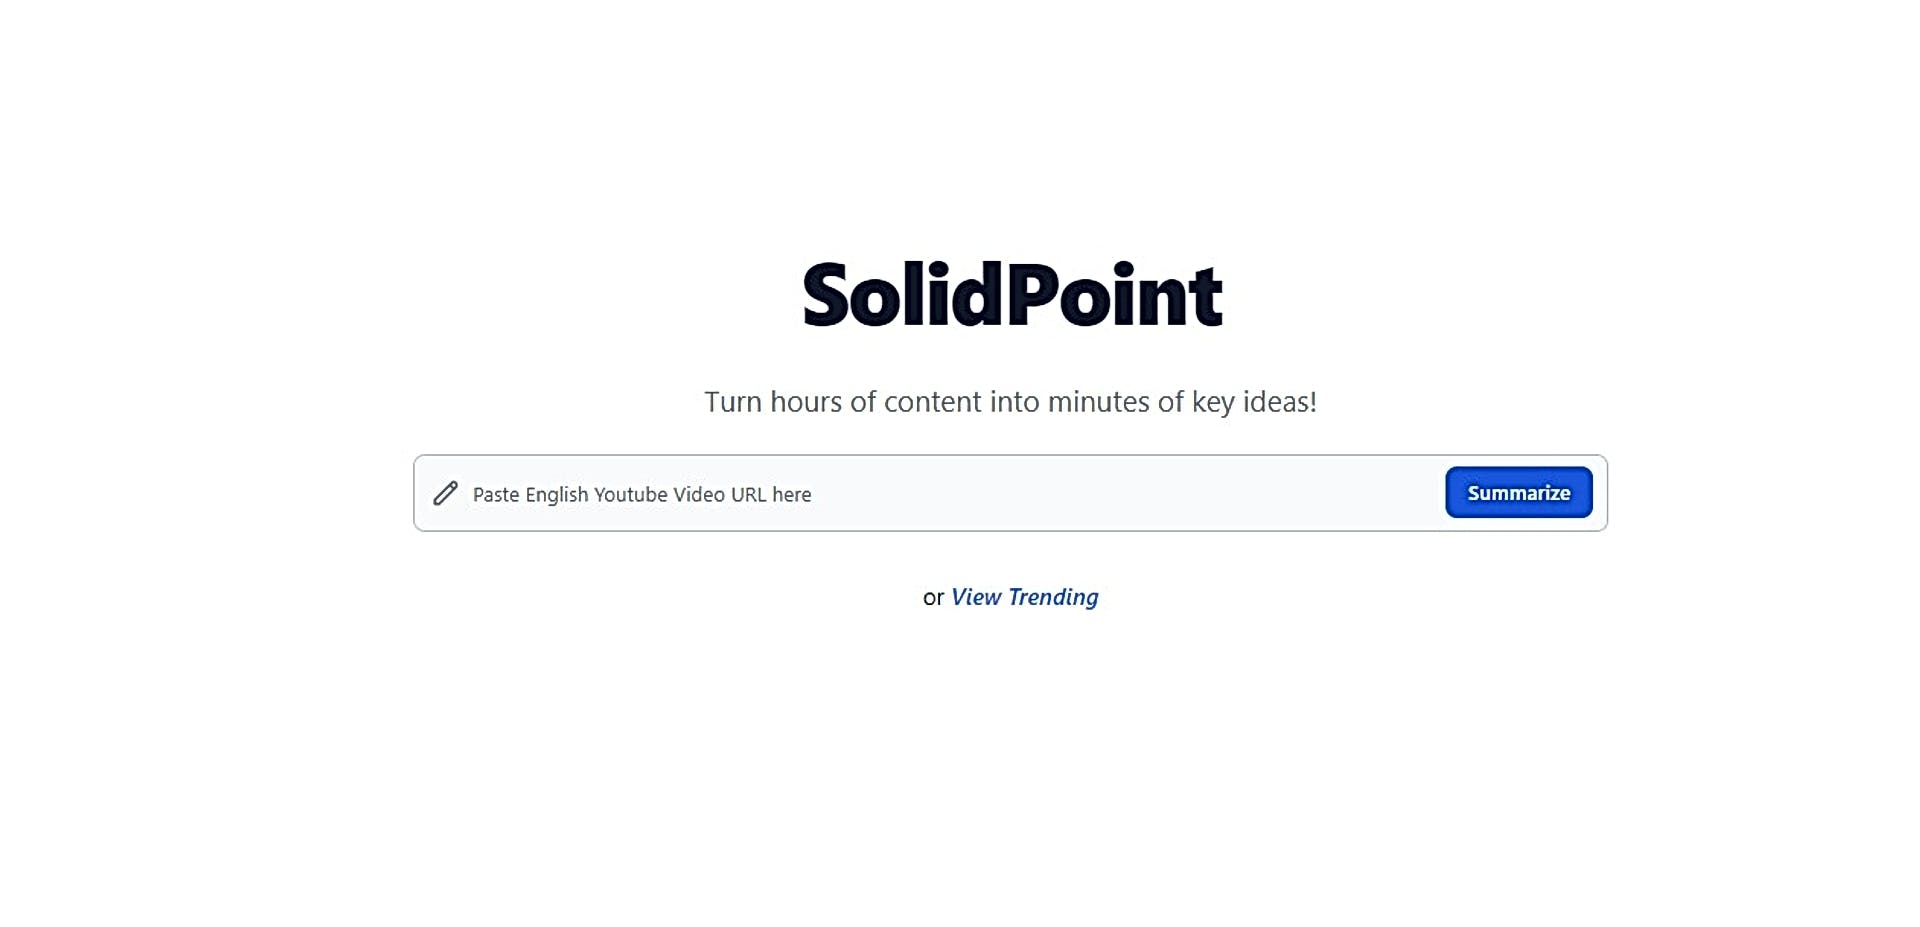 SolidPoint featured